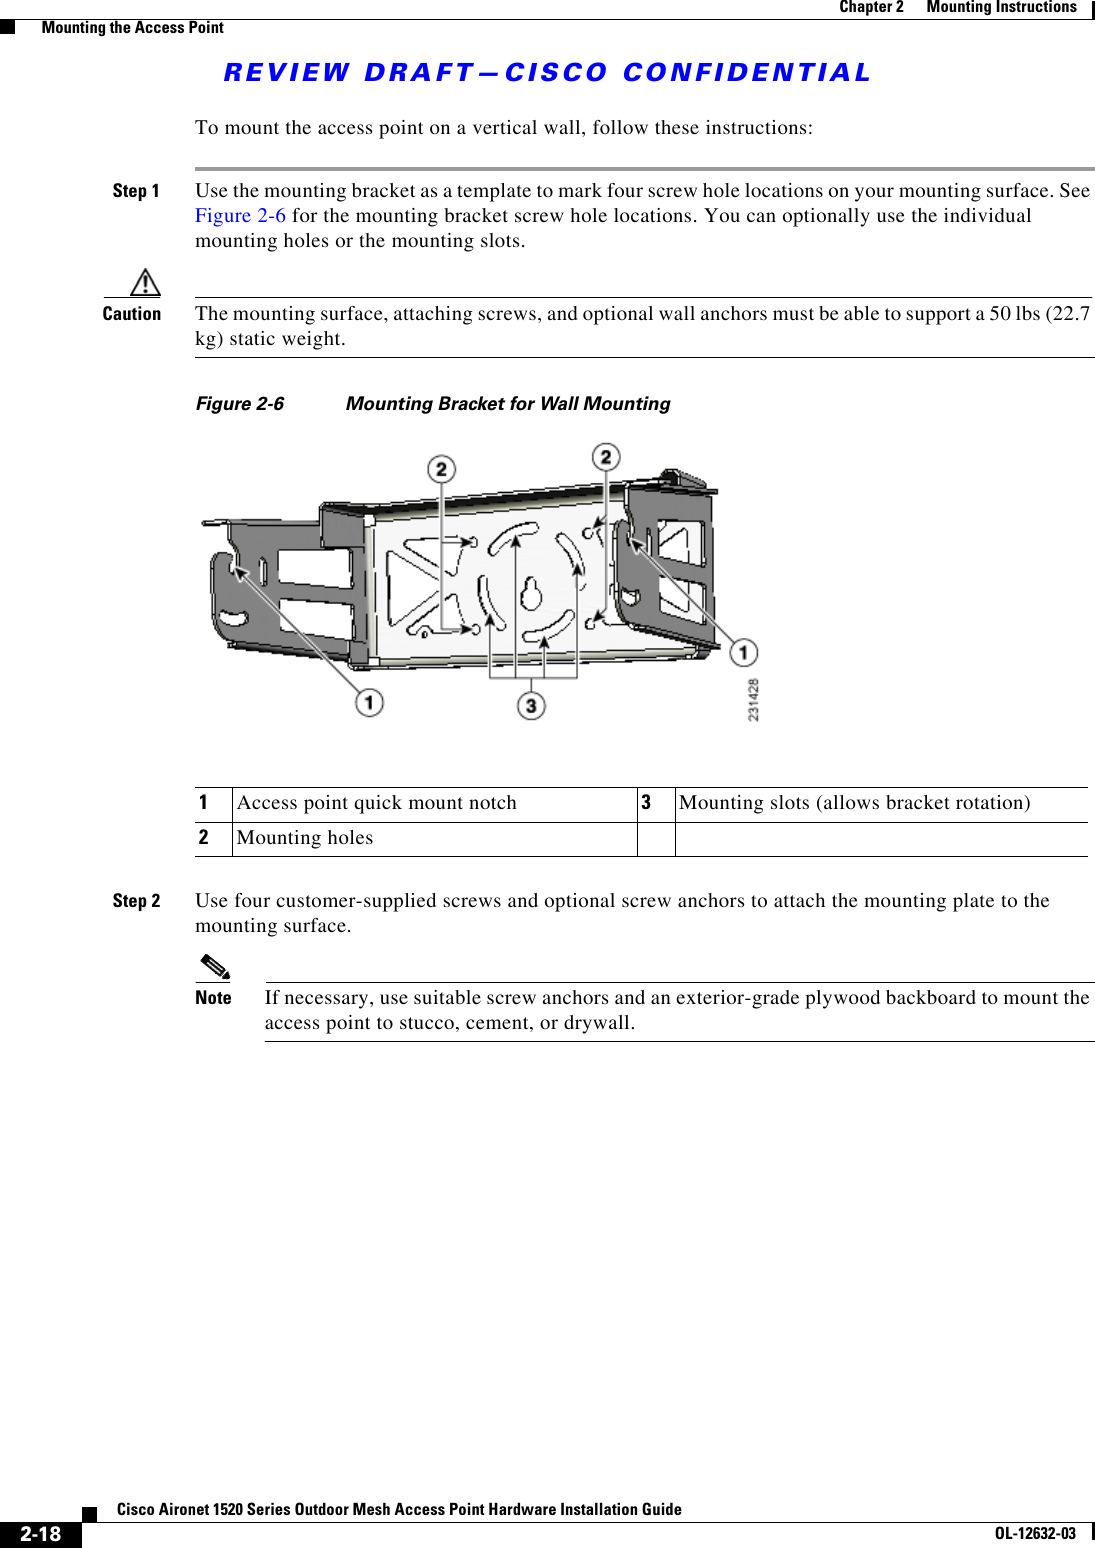 REVIEW DRAFT—CISCO CONFIDENTIAL2-18Cisco Aironet 1520 Series Outdoor Mesh Access Point Hardware Installation GuideOL-12632-03Chapter 2      Mounting Instructions  Mounting the Access PointTo mount the access point on a vertical wall, follow these instructions: Step 1 Use the mounting bracket as a template to mark four screw hole locations on your mounting surface. See Figure 2-6 for the mounting bracket screw hole locations. You can optionally use the individual mounting holes or the mounting slots.Caution The mounting surface, attaching screws, and optional wall anchors must be able to support a 50 lbs (22.7 kg) static weight. Figure 2-6 Mounting Bracket for Wall MountingStep 2 Use four customer-supplied screws and optional screw anchors to attach the mounting plate to the mounting surface.Note If necessary, use suitable screw anchors and an exterior-grade plywood backboard to mount the access point to stucco, cement, or drywall.1Access point quick mount notch 3Mounting slots (allows bracket rotation)2Mounting holes